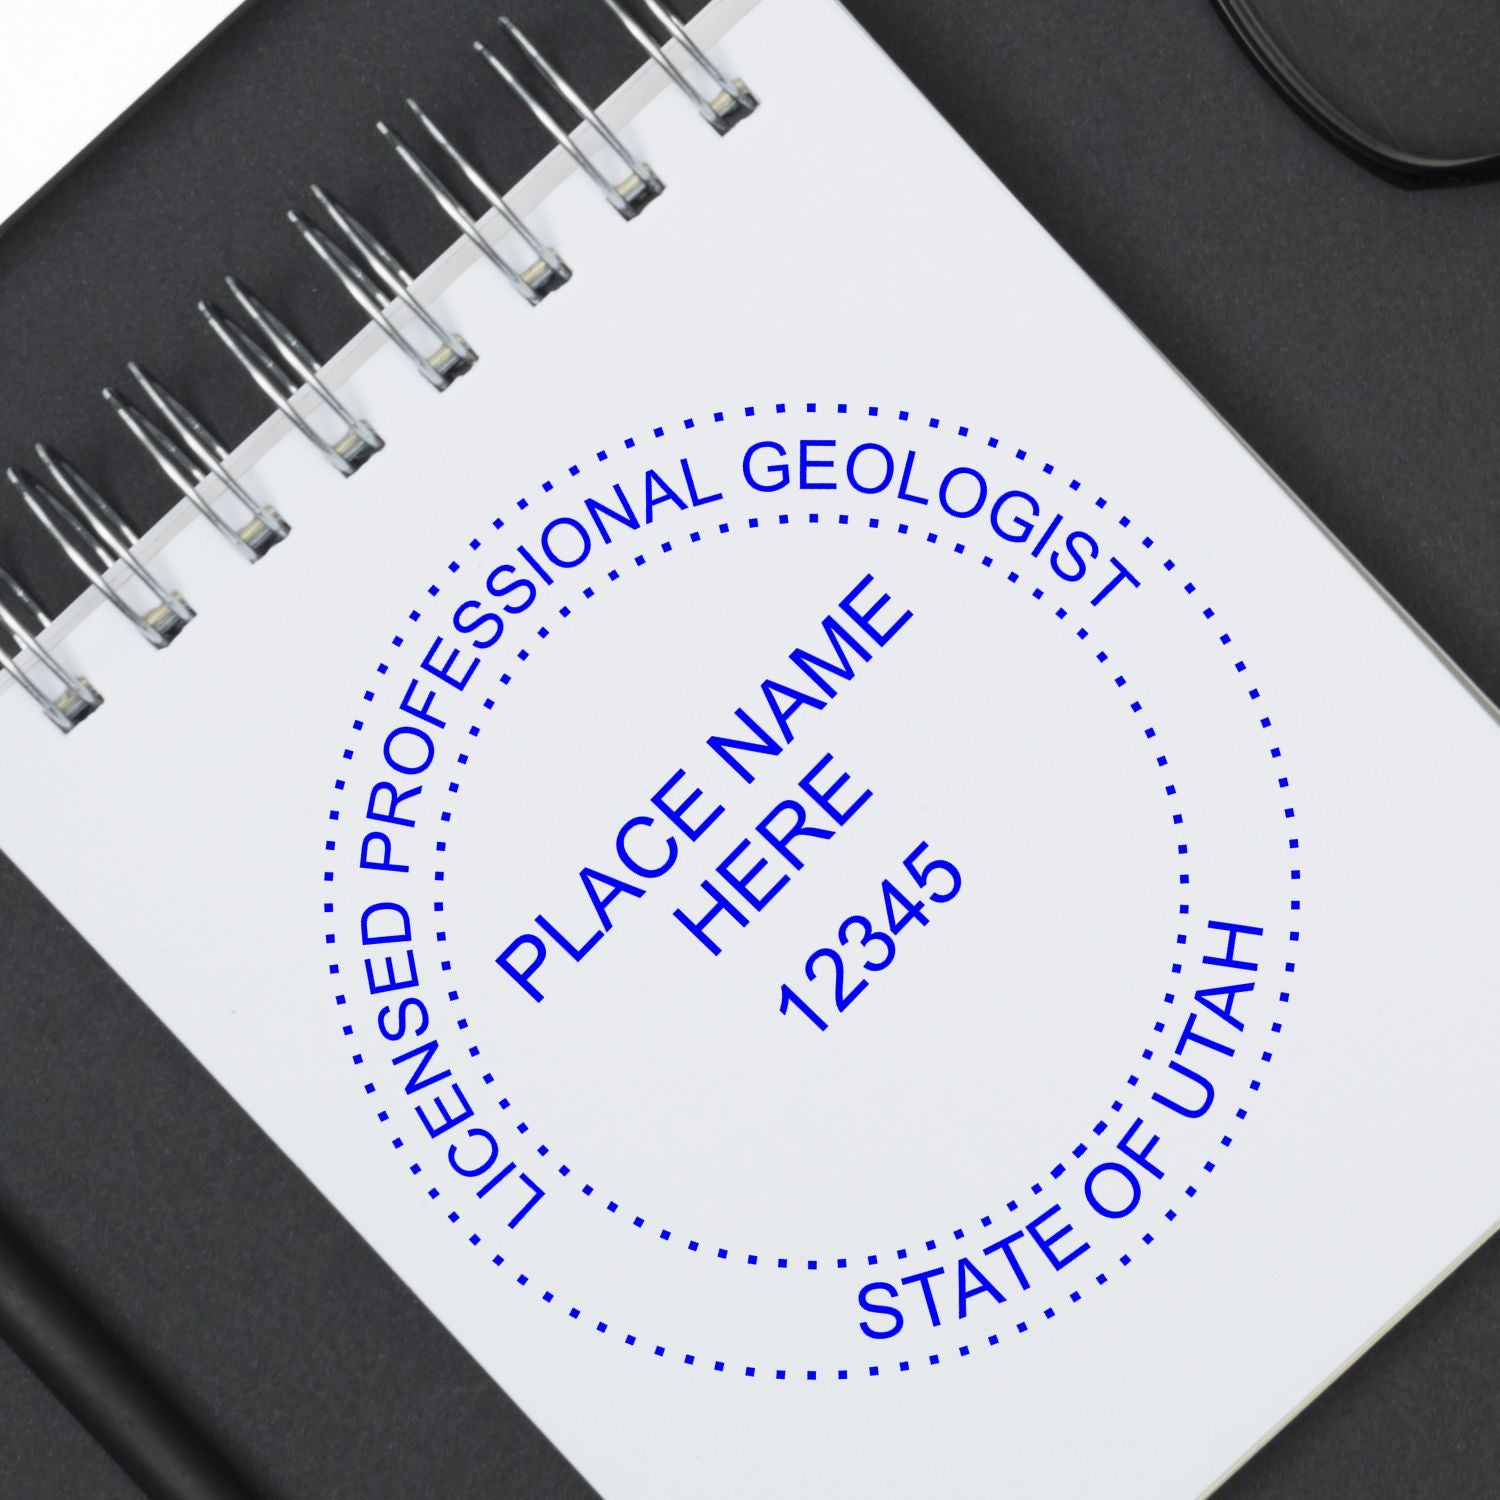 The main image for the Digital Utah Geologist Stamp, Electronic Seal for Utah Geologist depicting a sample of the imprint and imprint sample